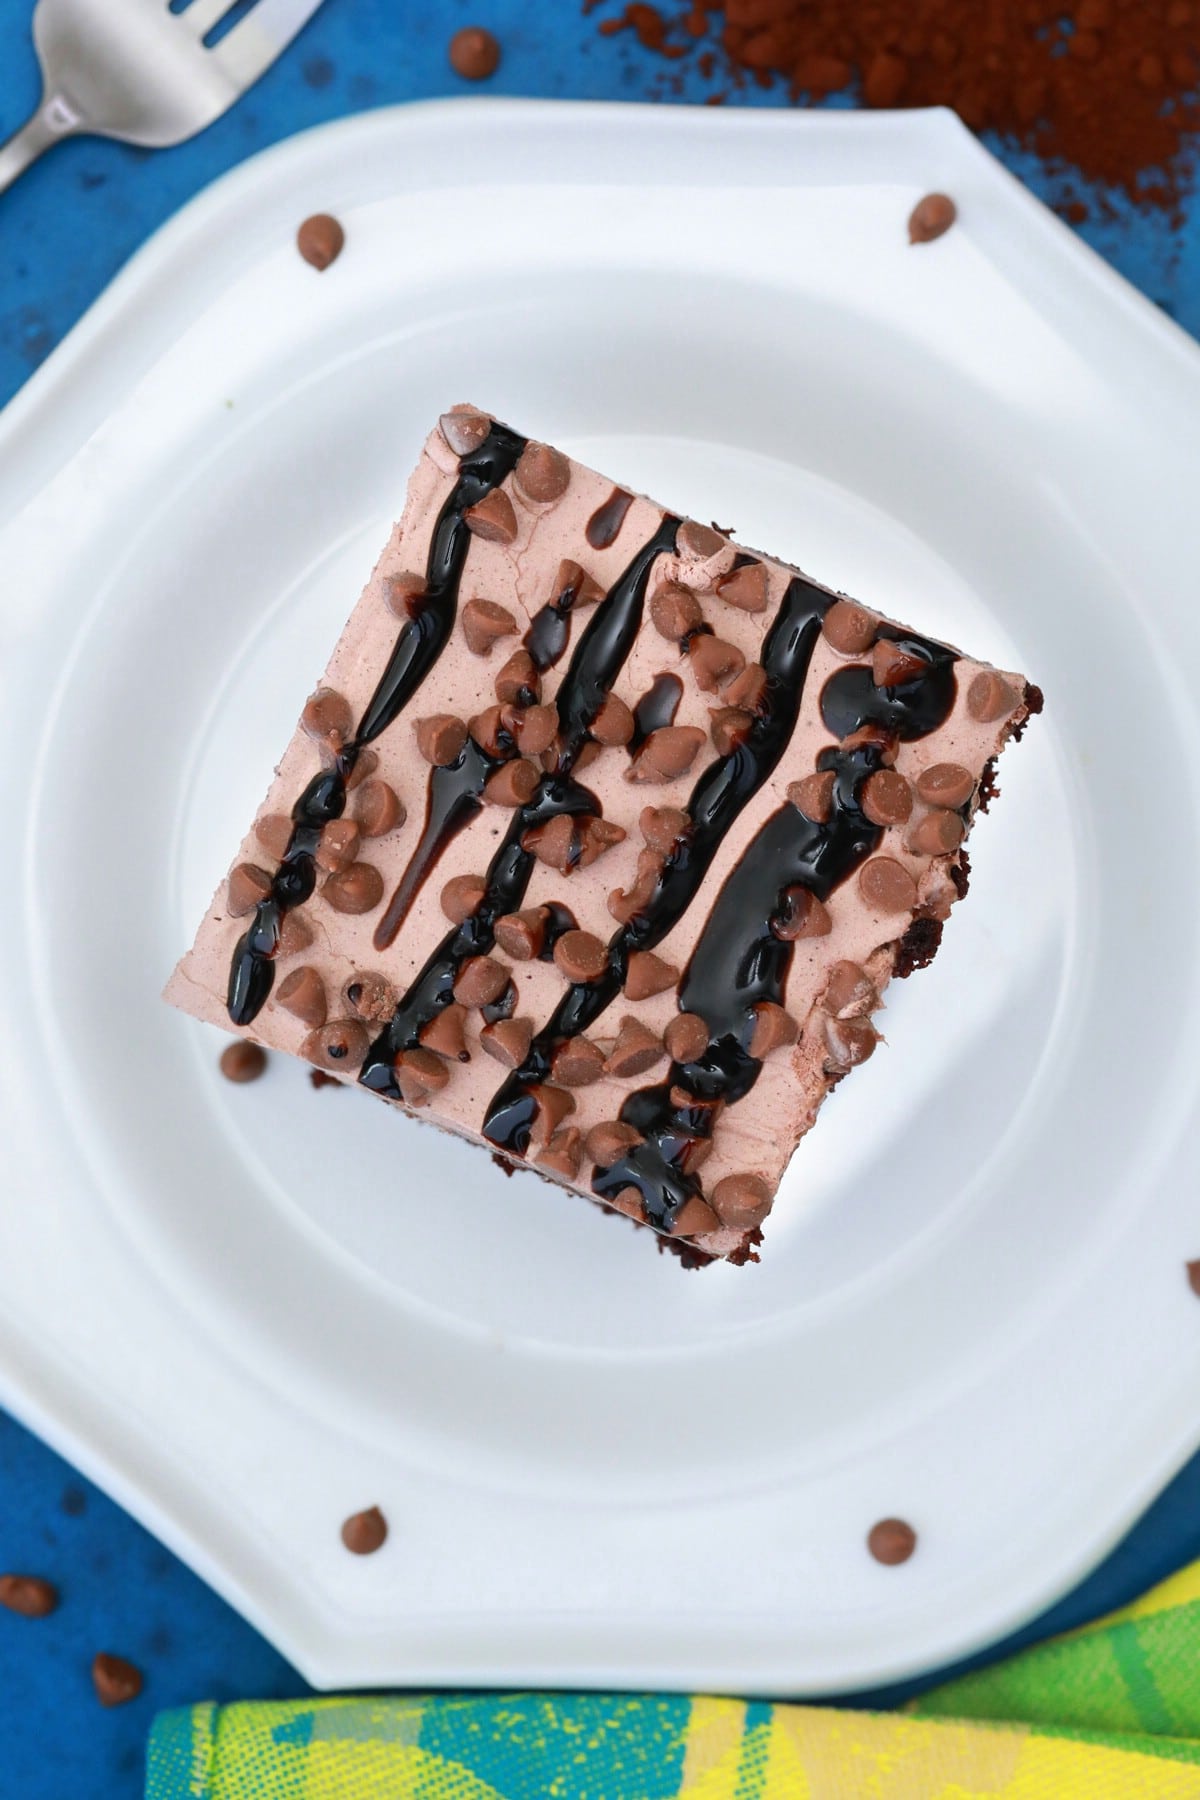 Cake on white plate with chocolate icing and chocolate chips